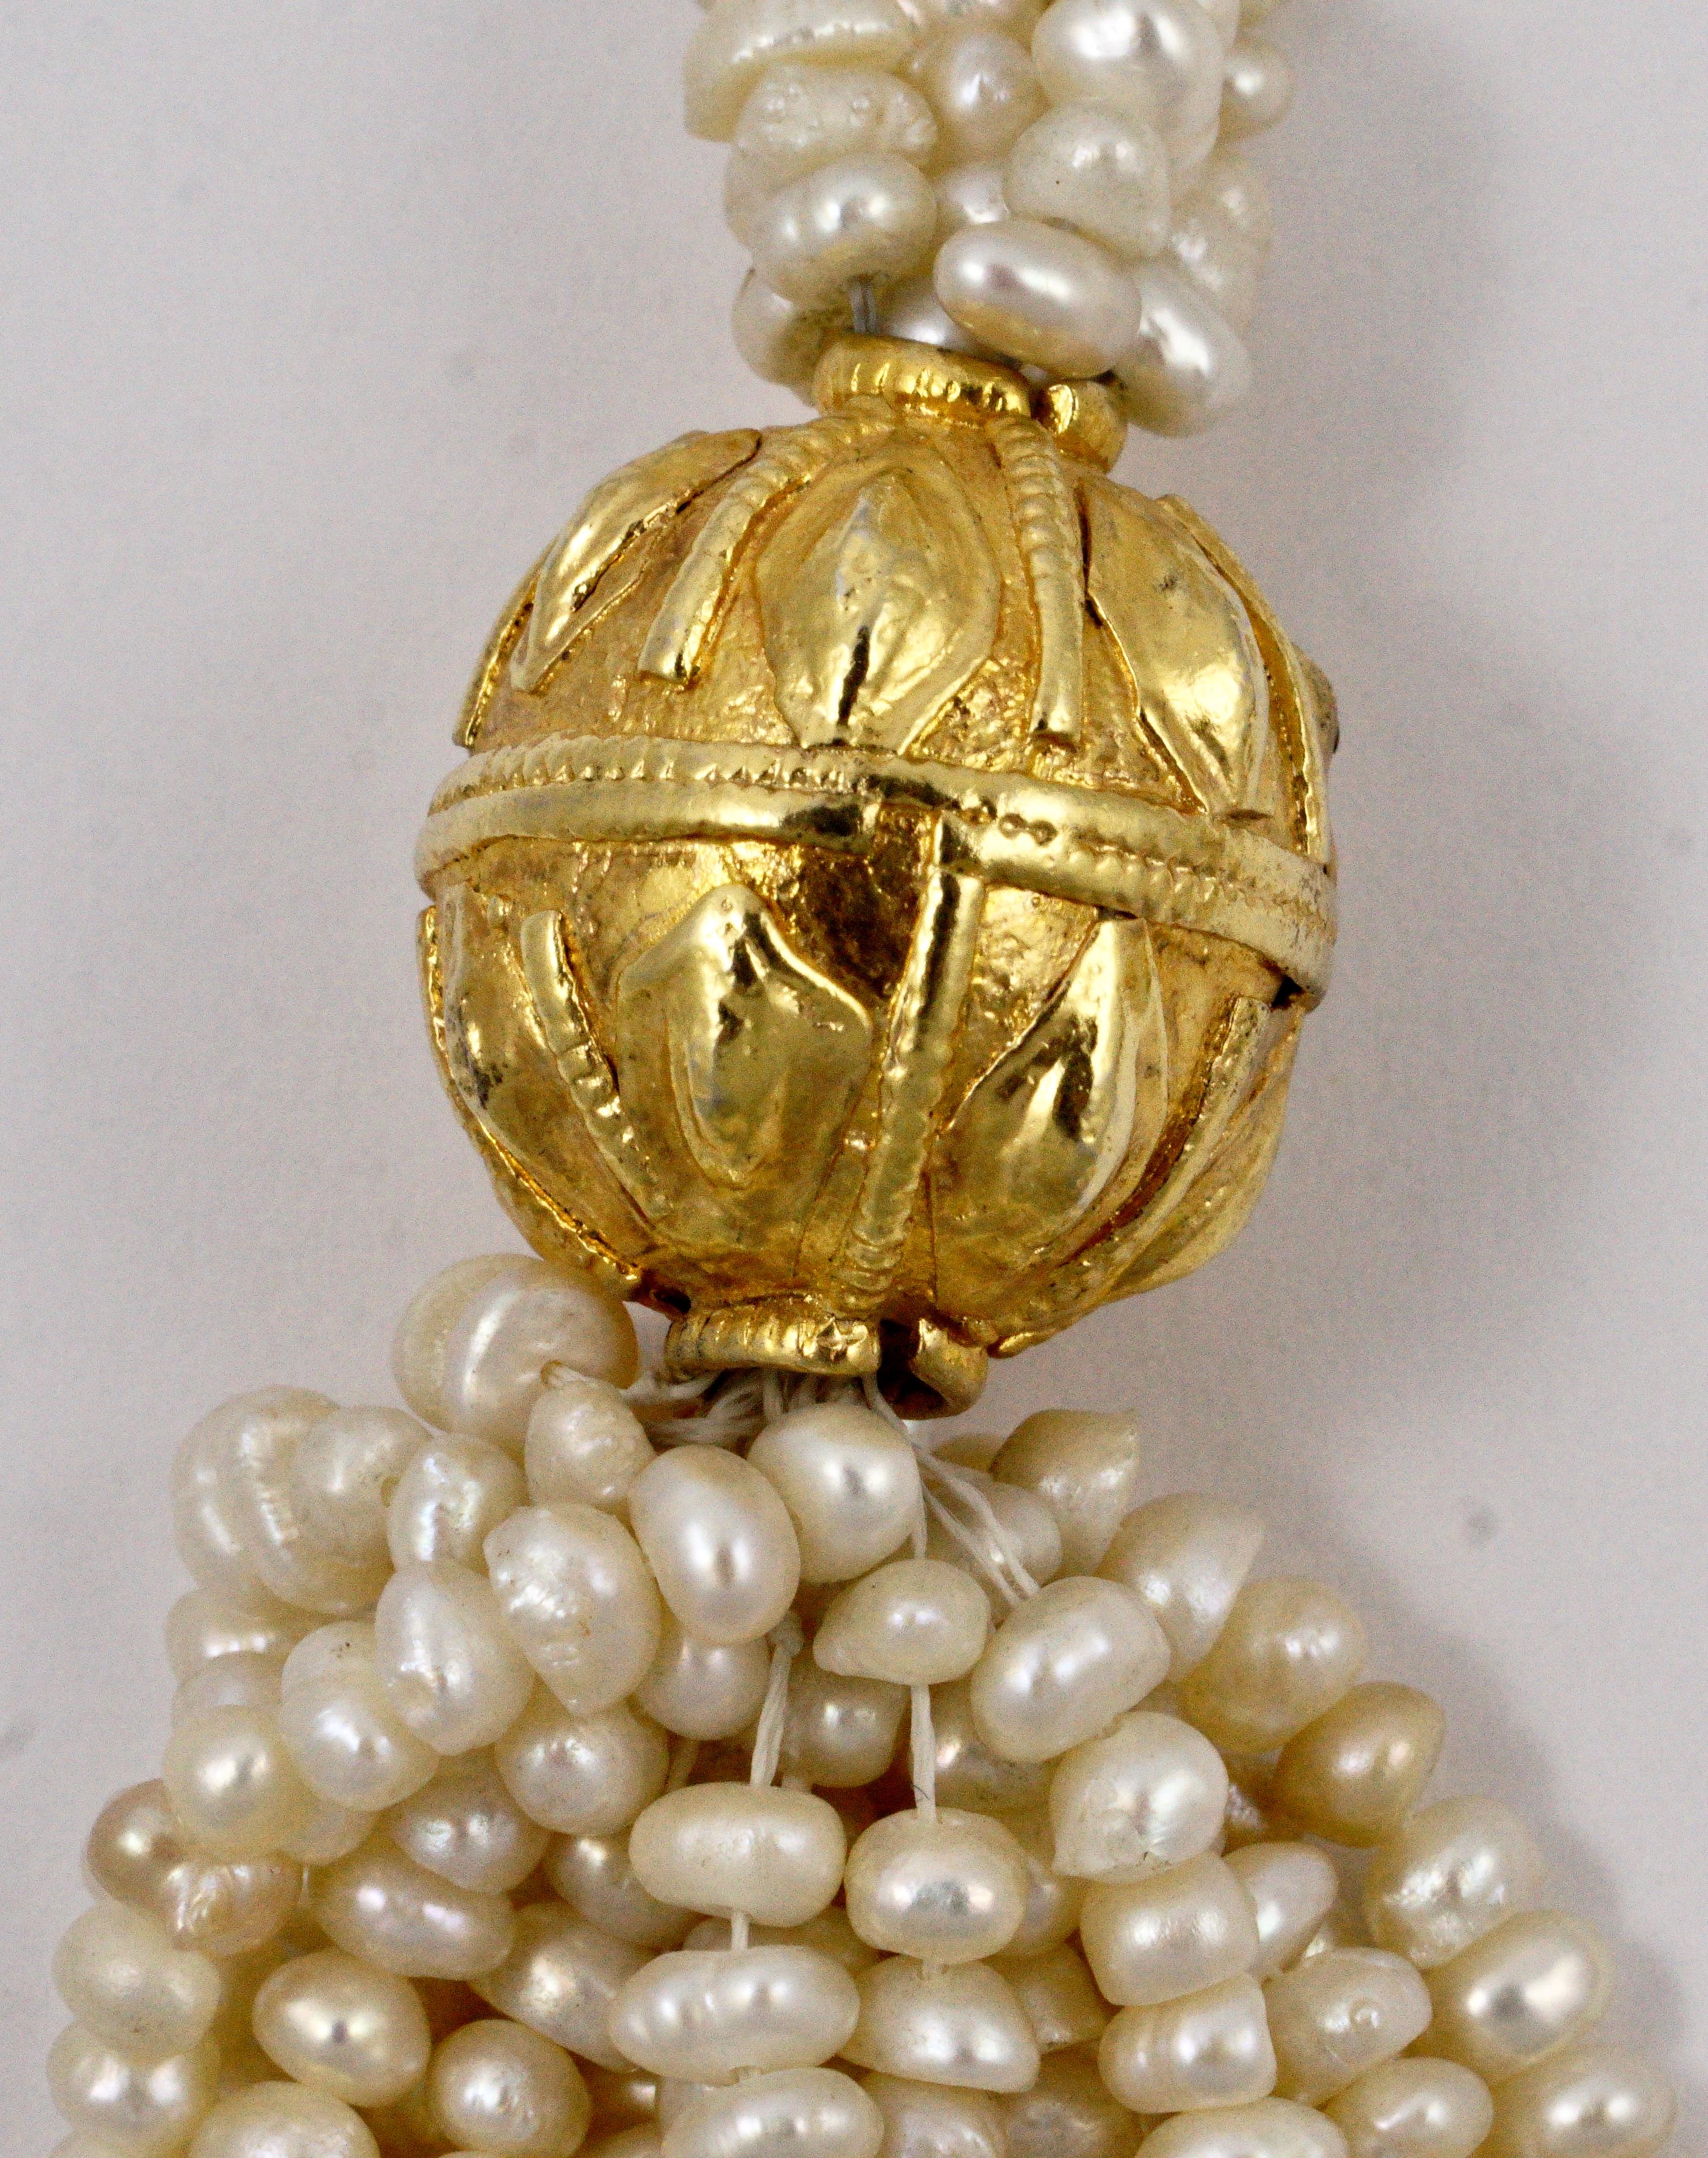 Luxurious multi strand cream freshwater pearl necklace featuring ornate gold plated balls, and a decorative golden clasp. The main part of the necklace has sixteen strands of pearls, reducing to six strands towards the clasp. The necklace is in very